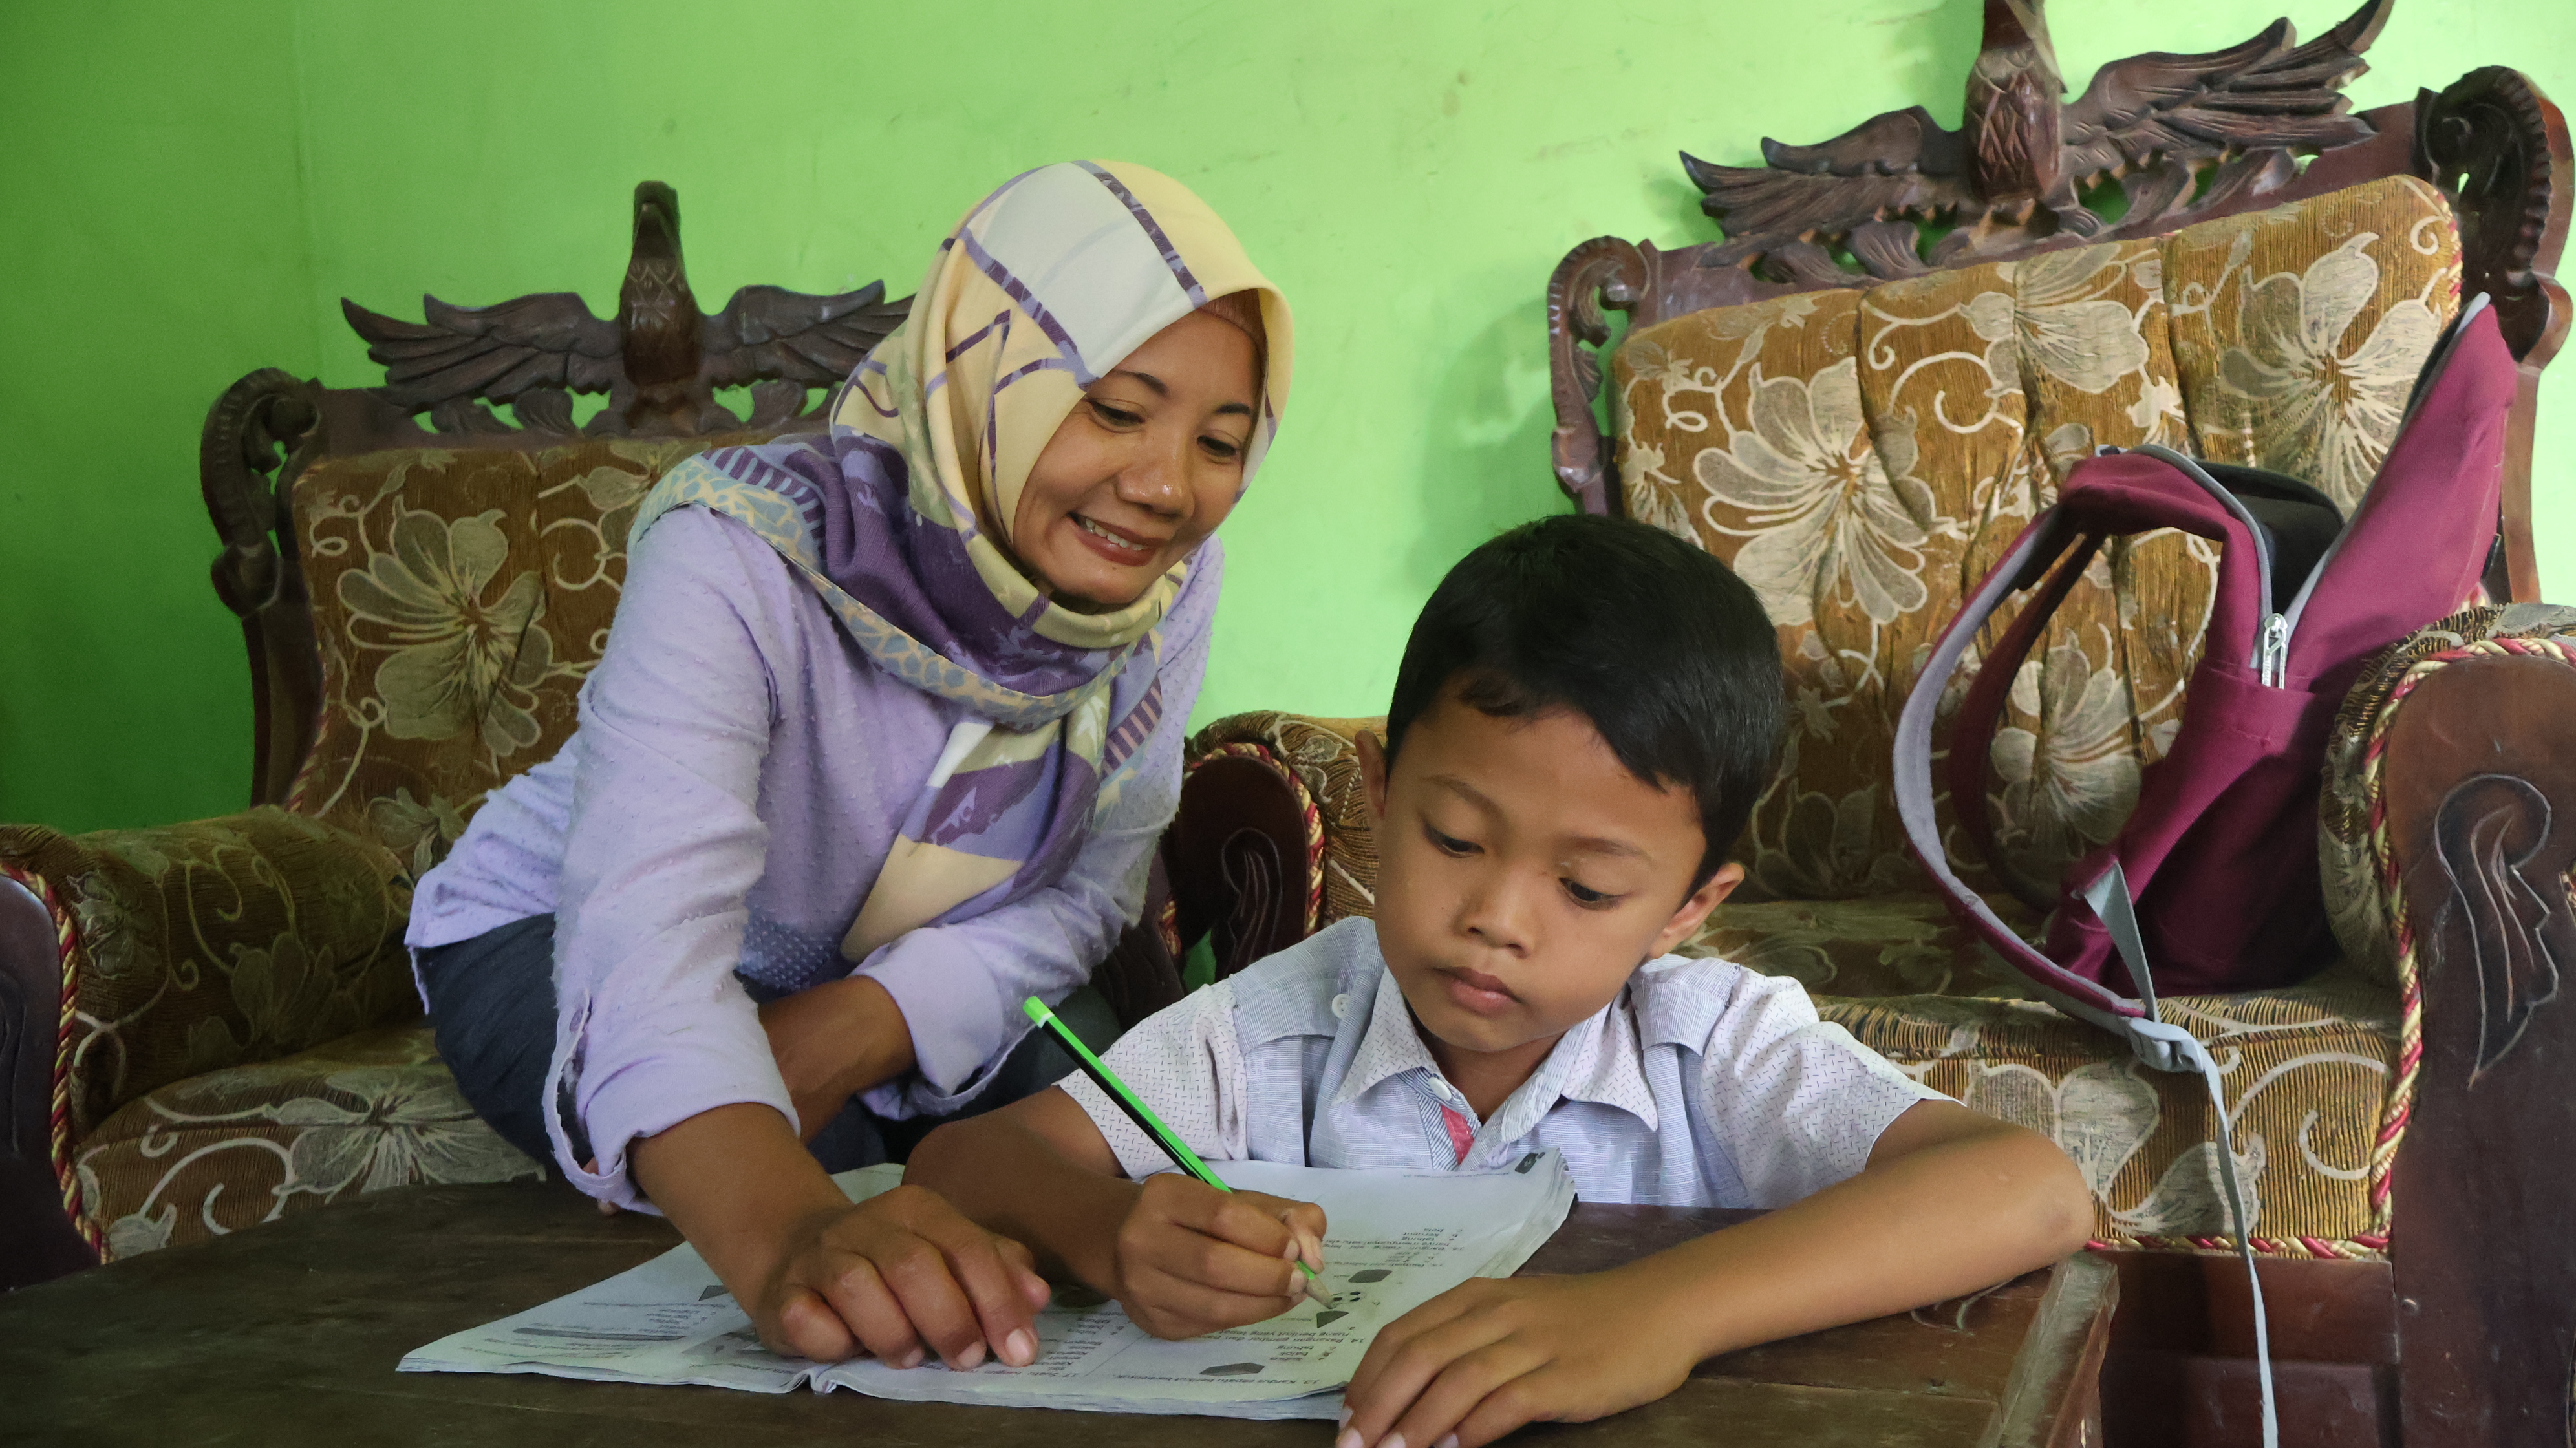 Supanti helps her youngest son with his school homework